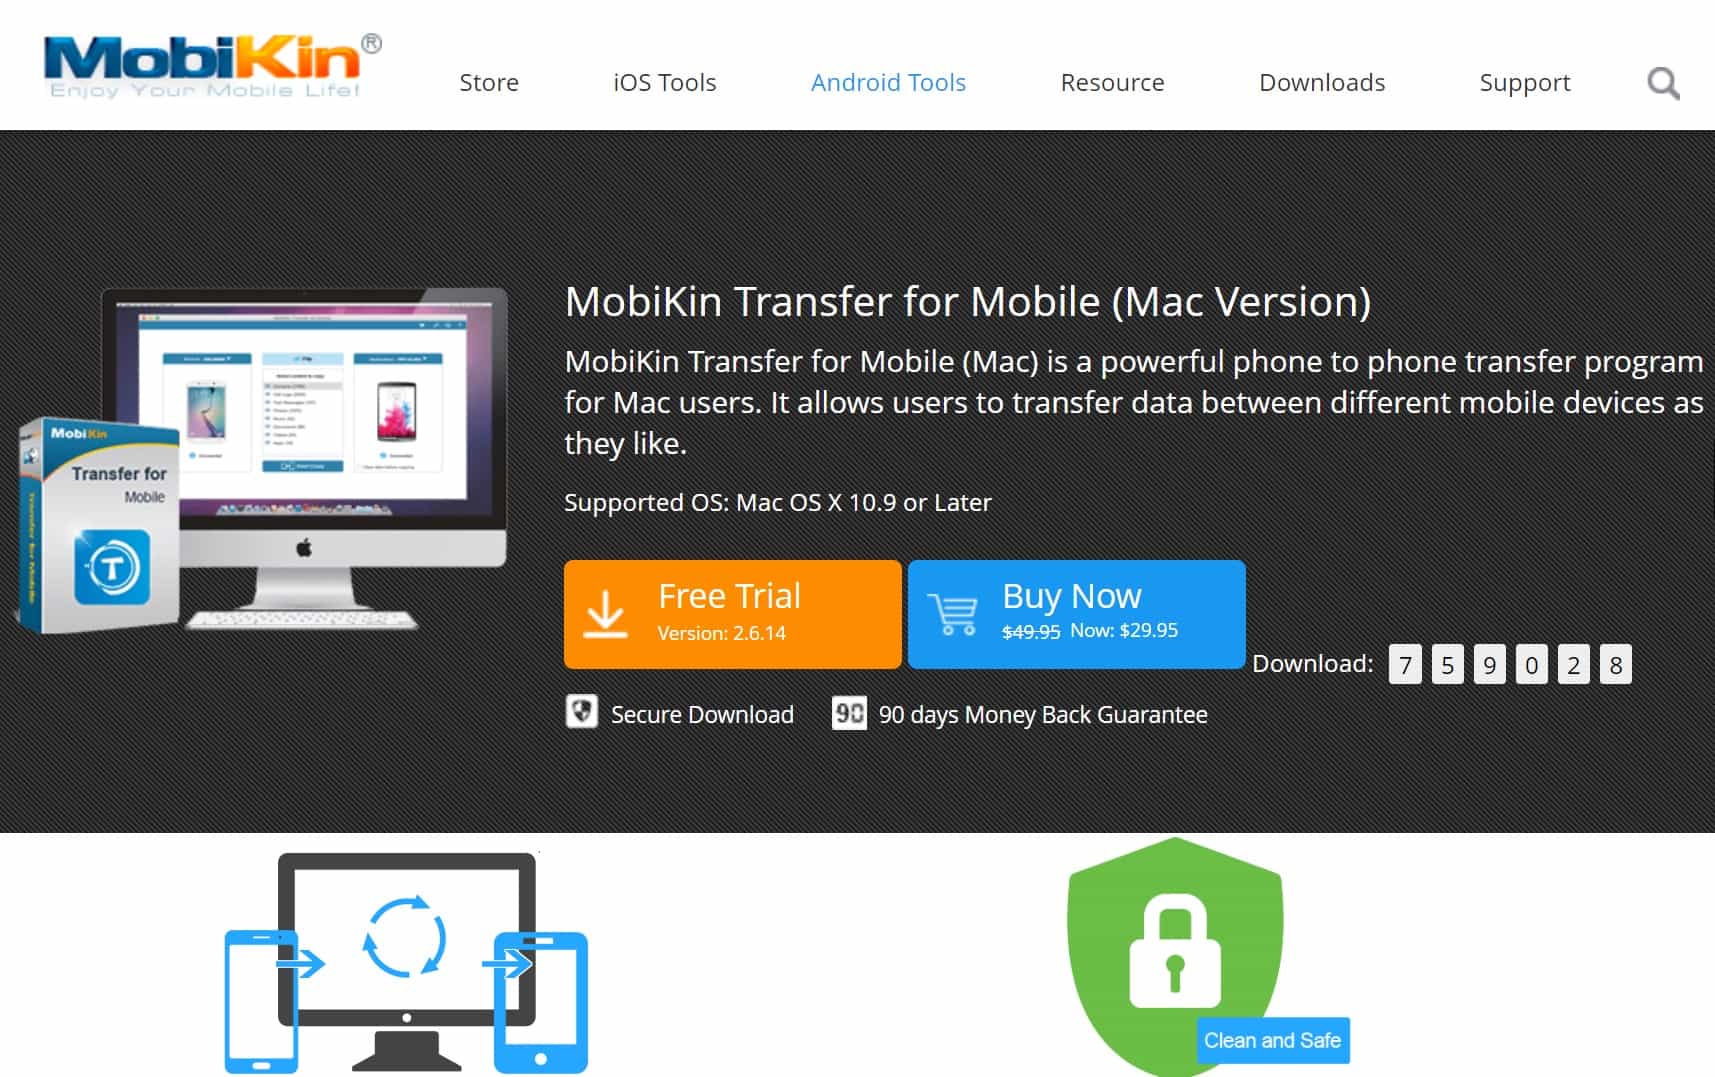 MobiKin Transfer is perfect for both Windows and Mac.